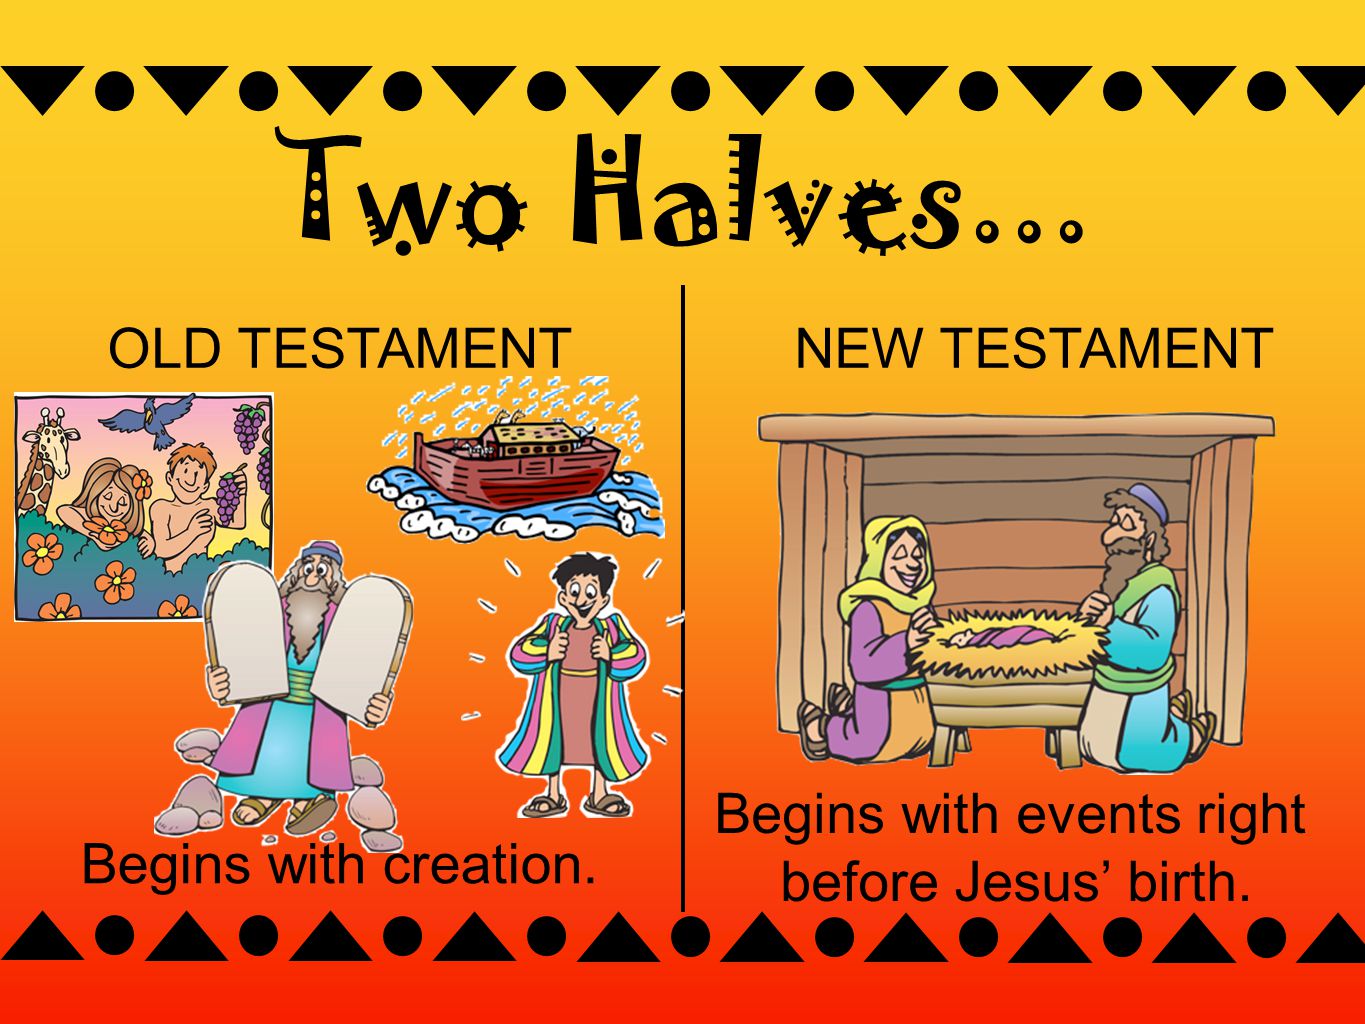 Two Halves... OLD TESTAMENT Begins with creation.